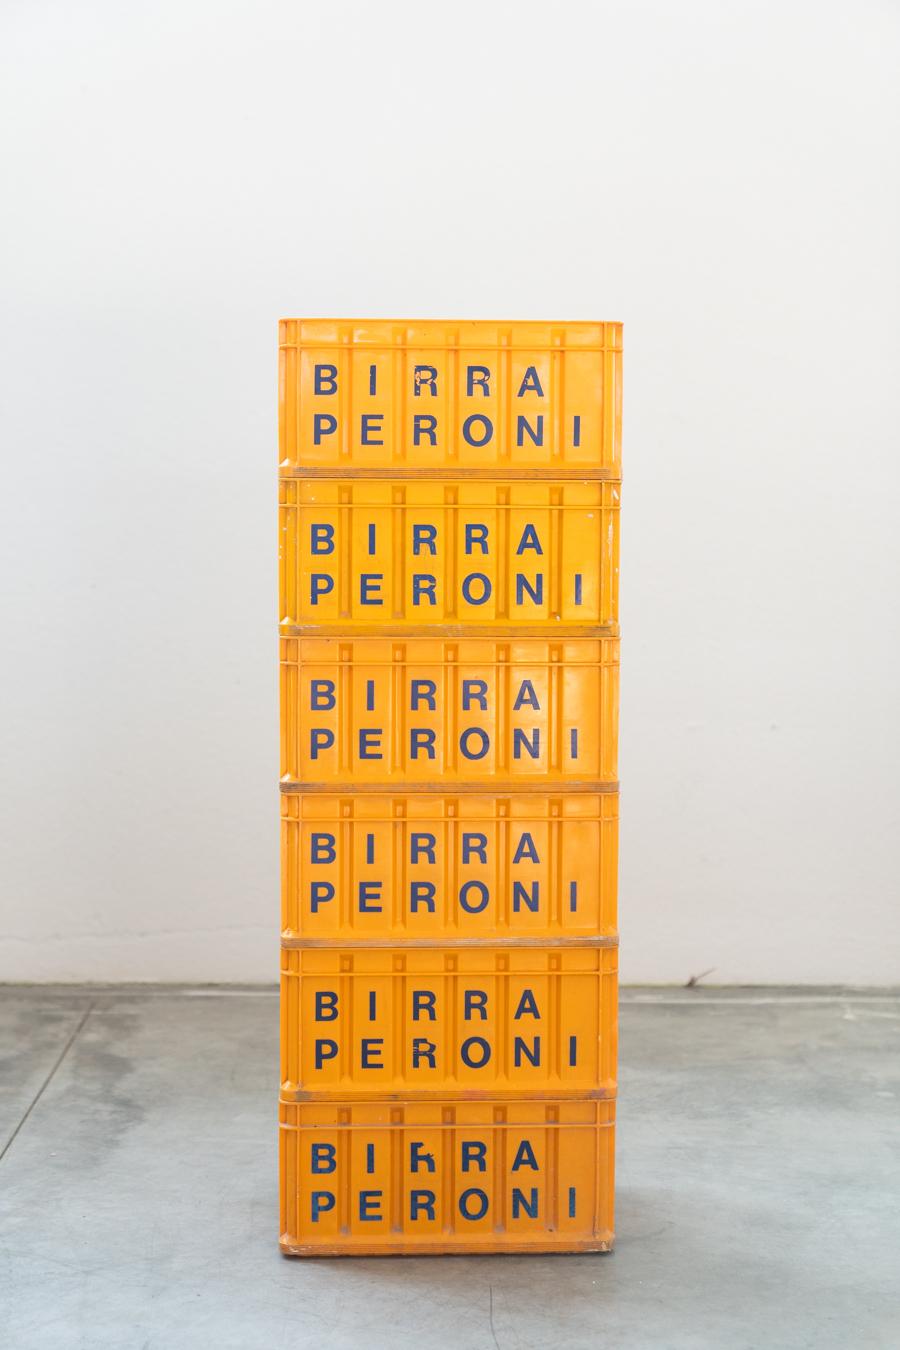 Vintage Peroni beer plastic crates, set of 8. 1970-1980
H21.5 x W45.5 x D37 
Kg tot 5
Style
Vintage
Periodo del design
1970 - 1979
Production Period
1970 - 1979
Year Manufactured
1970
Country of Manufacture
Italy
Material
Plastic
Color
Yellow,